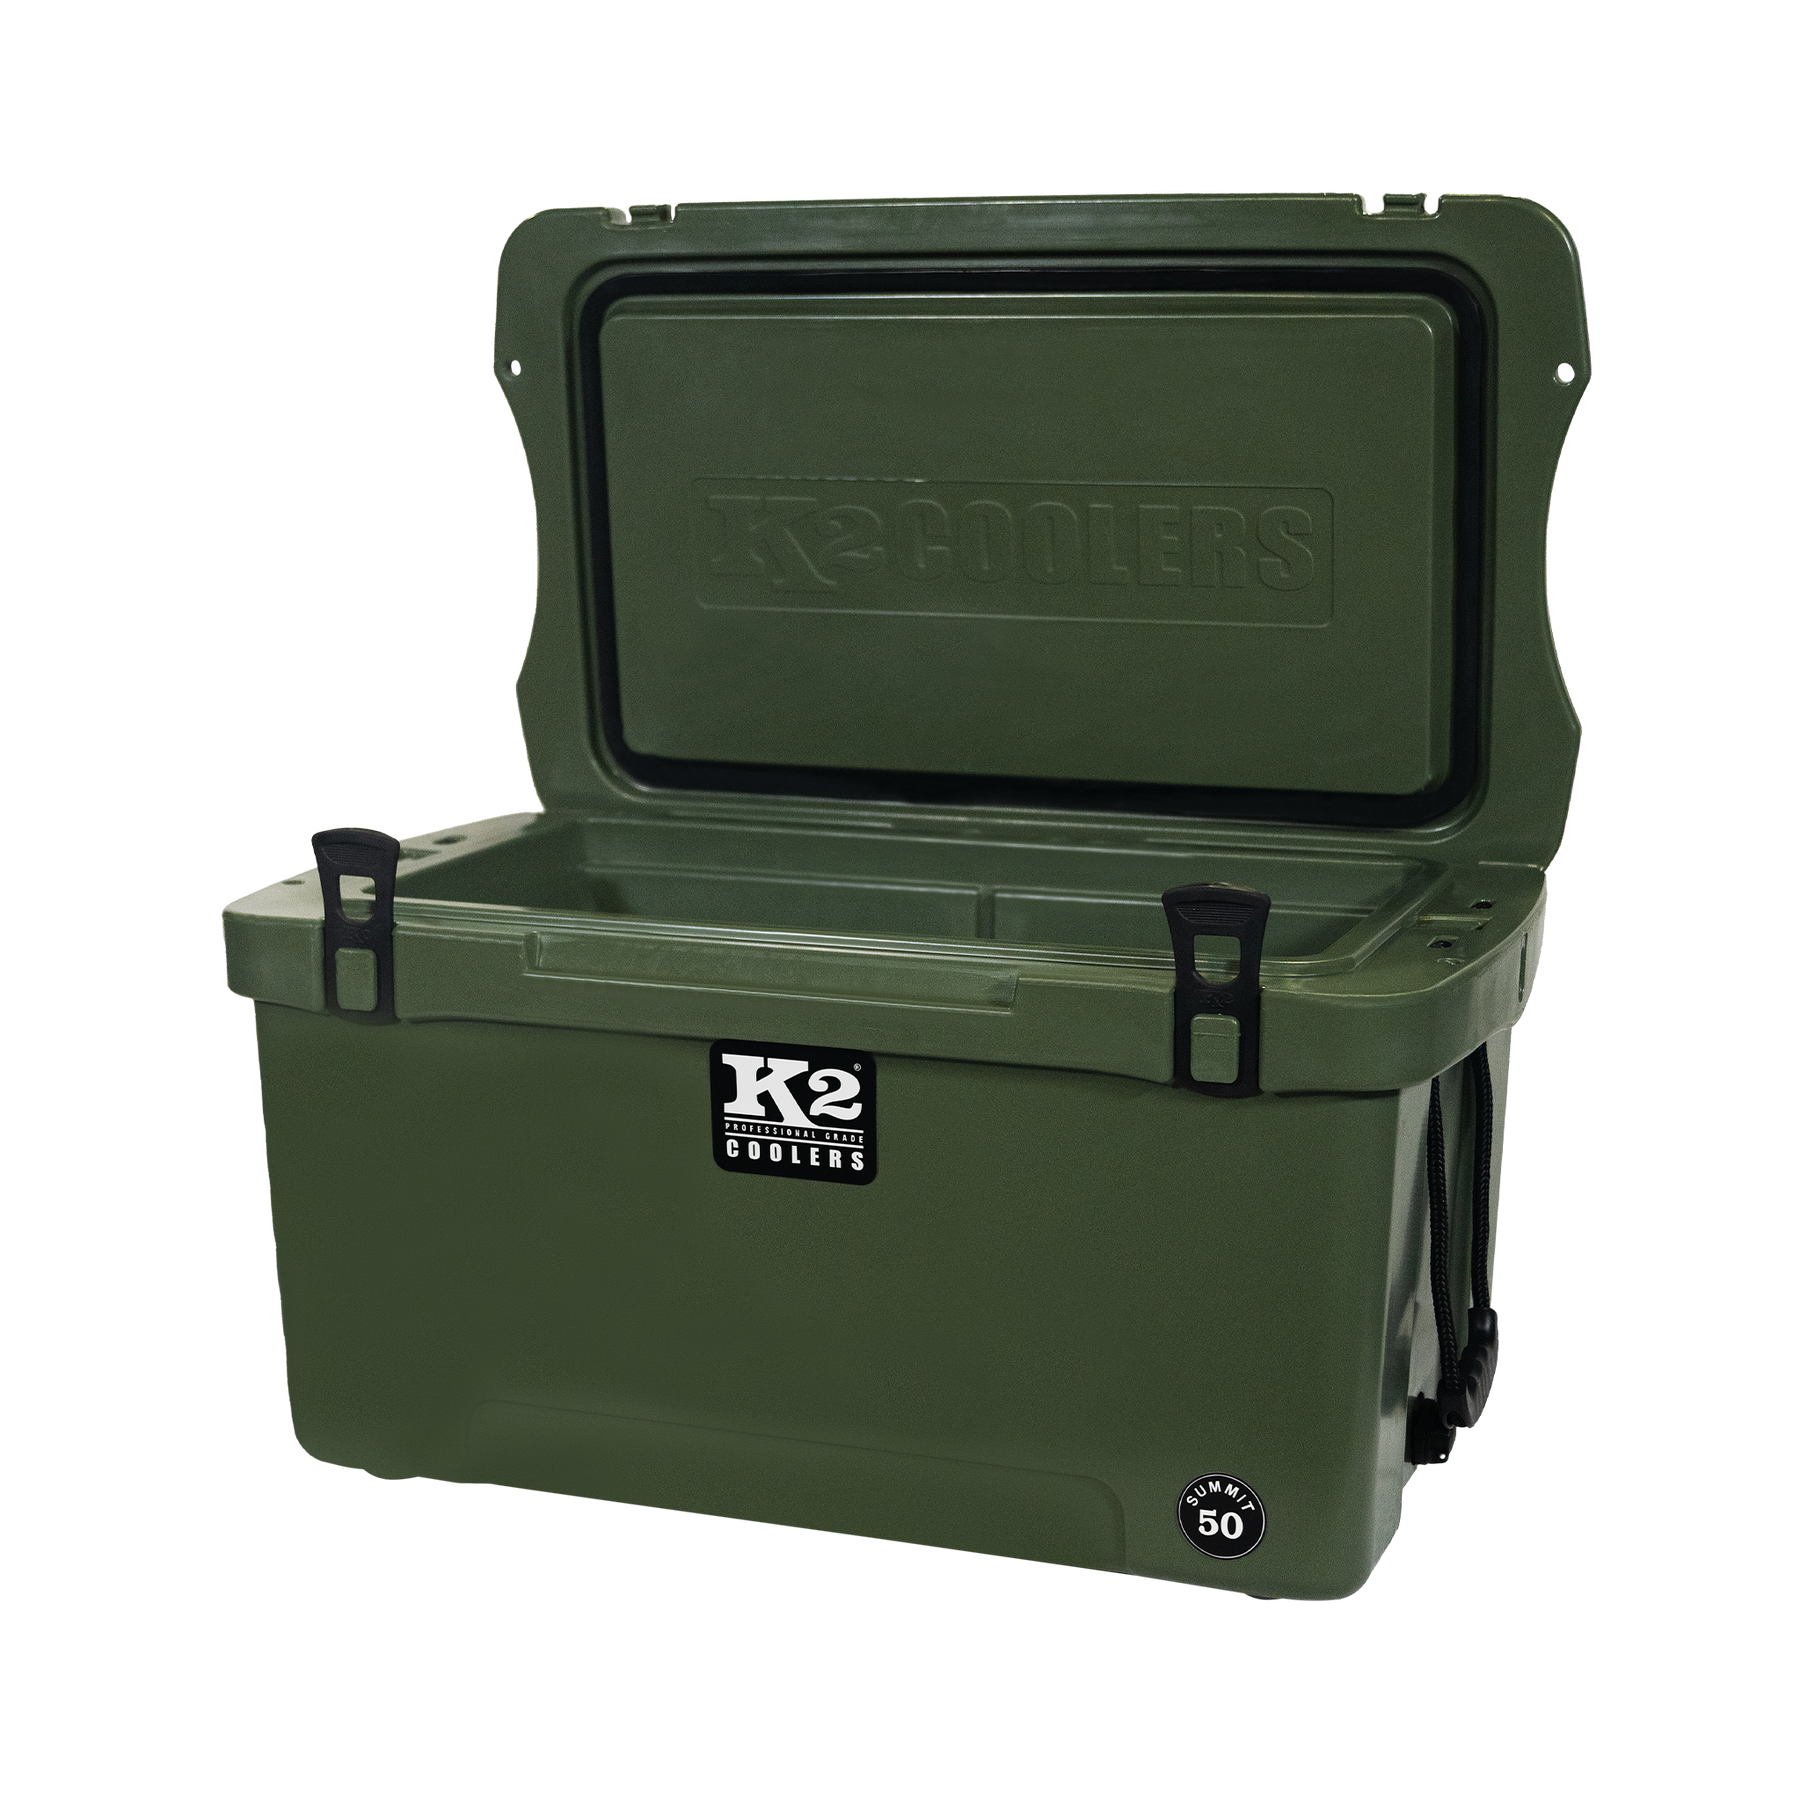 Summit 50 by K2Coolers